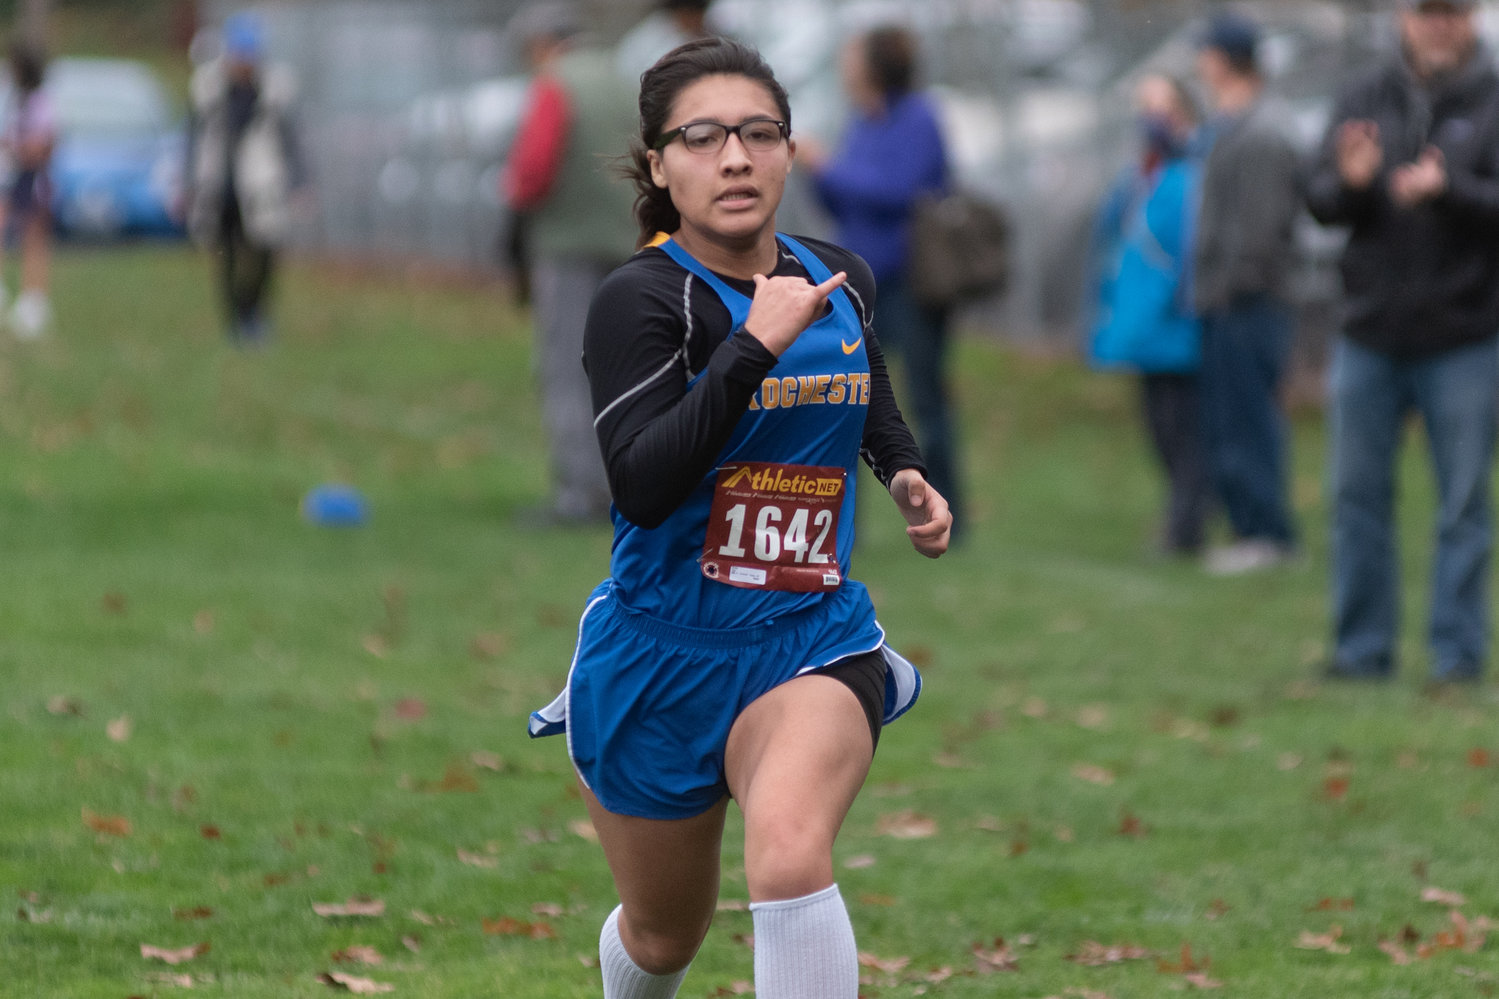 A Rochester runner races toward the finish line at the 2A Evergreen Championships at Pioneer Park Oct. 20.